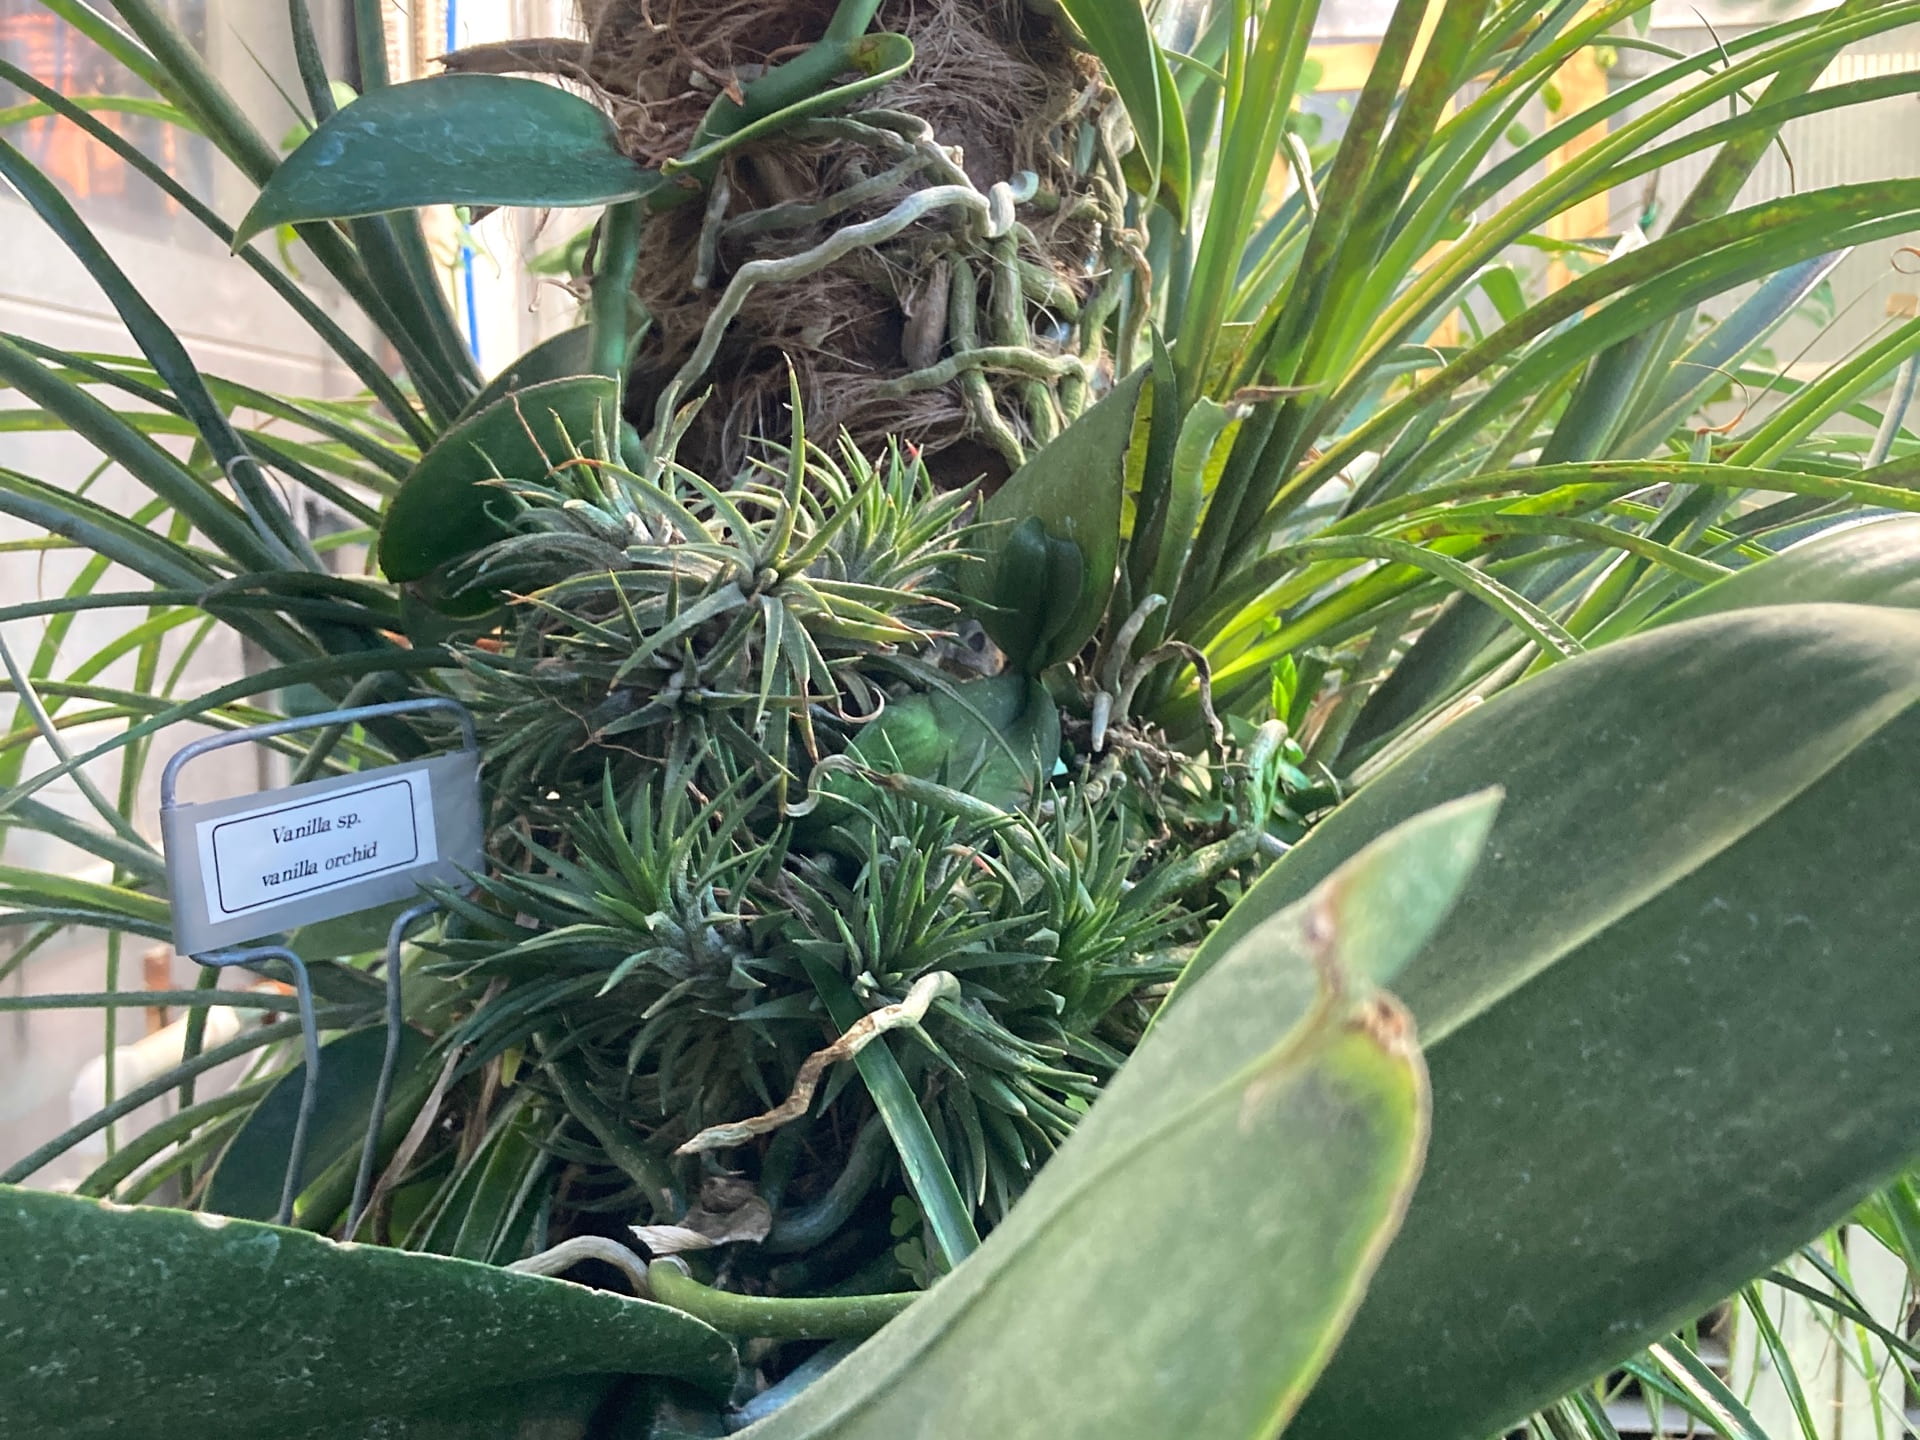 Epiphytic plants do not grow in the soil. Instead, they grow on the surface of other plants and get their nutrients from water and decomposing debris that accumulates around them.